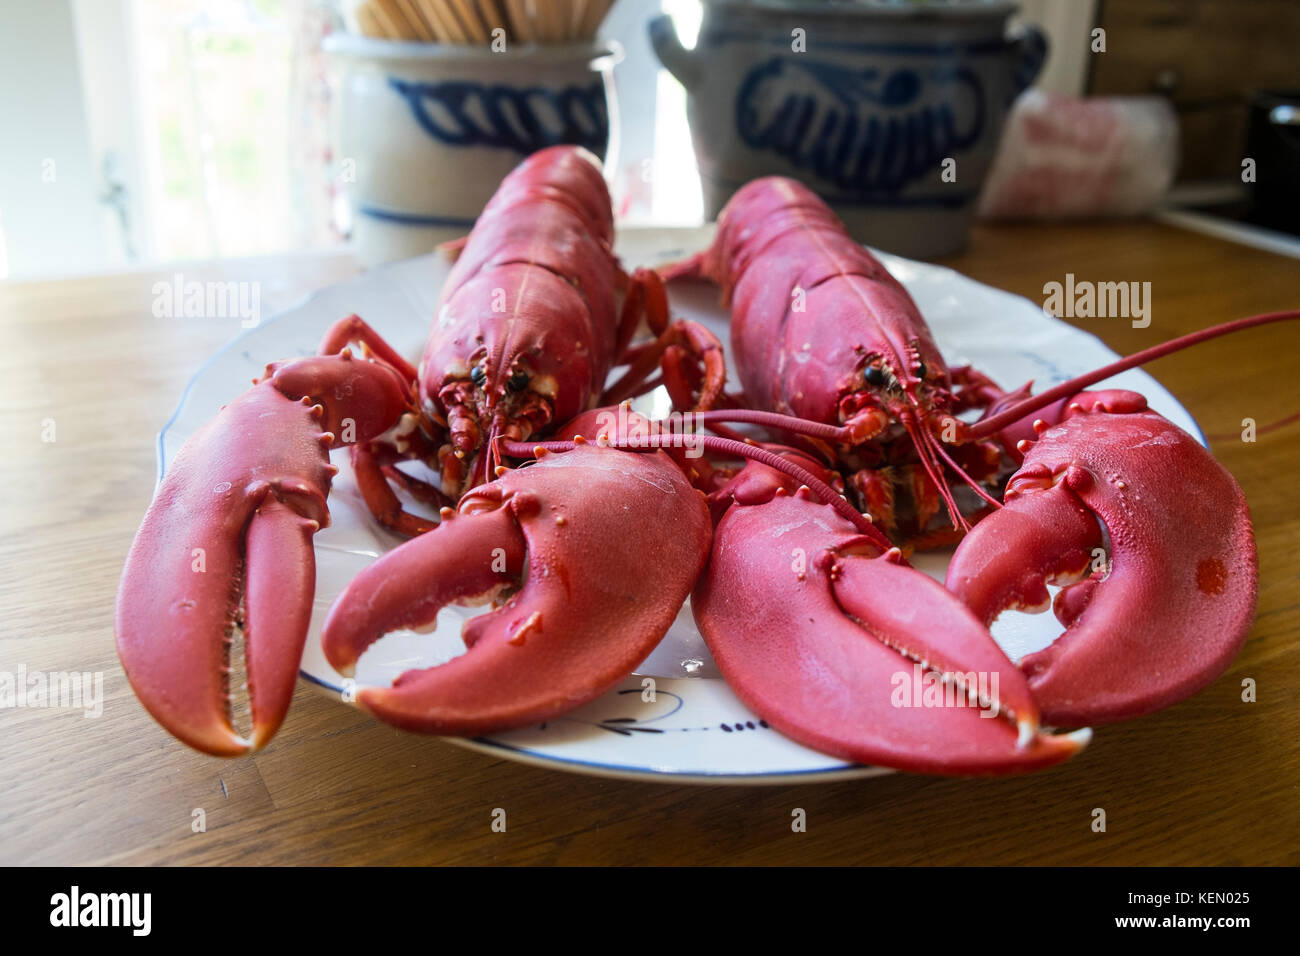 Two 2 whole boiled lobster on a plate in Norway Stock Photo